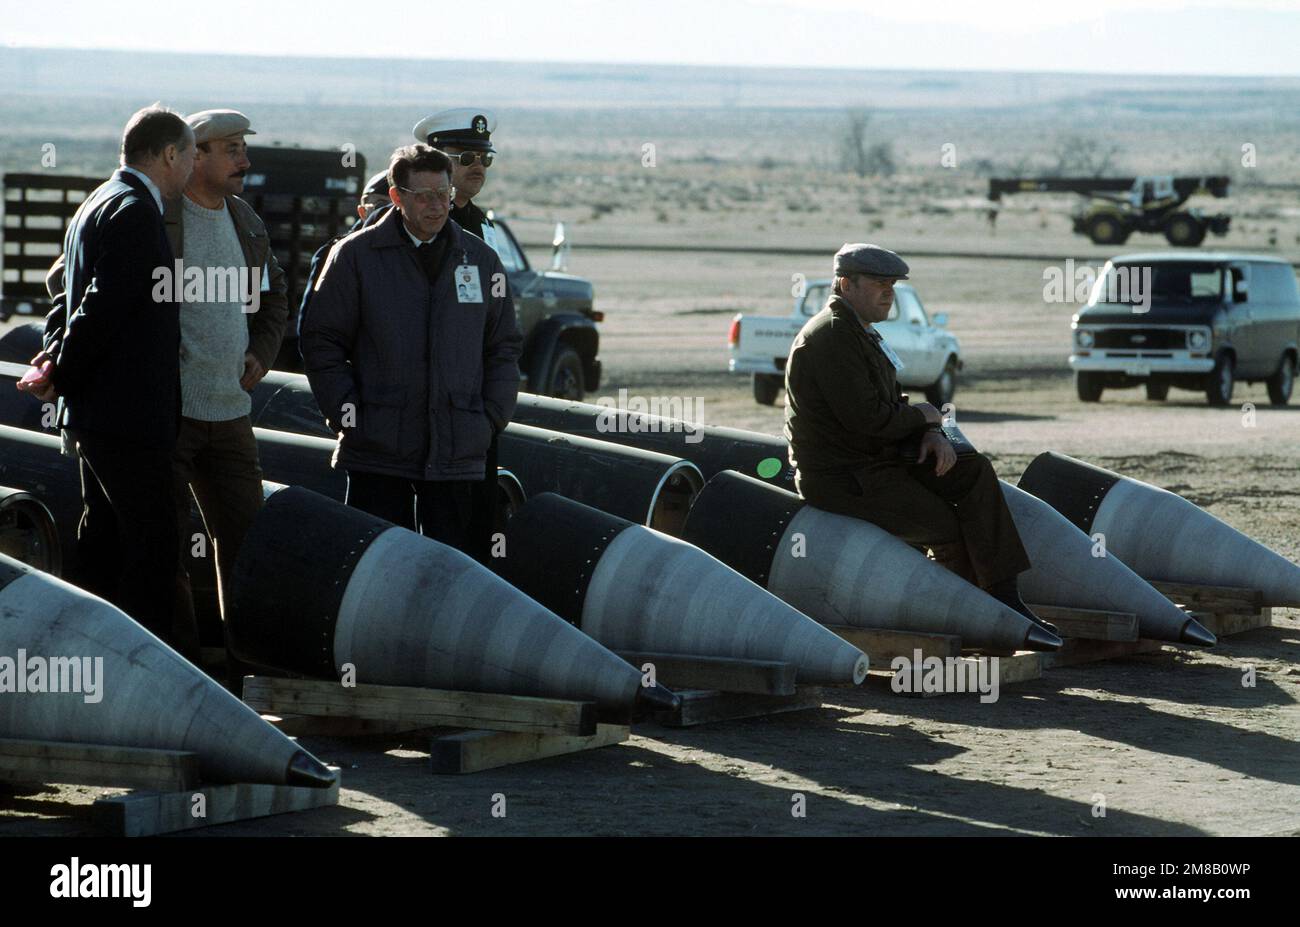 Soviet inspectors and their American escorts stand among several dismantled Pershing II missiles as they view the destruction of other missile components. The missiles are being destroyed in accordance with the Intermediate-Range Nuclear Forces (INF) Treaty. Base: Pueblo Army Depot Activity State: Colorado (CO) Country: United States Of America (USA) Stock Photo